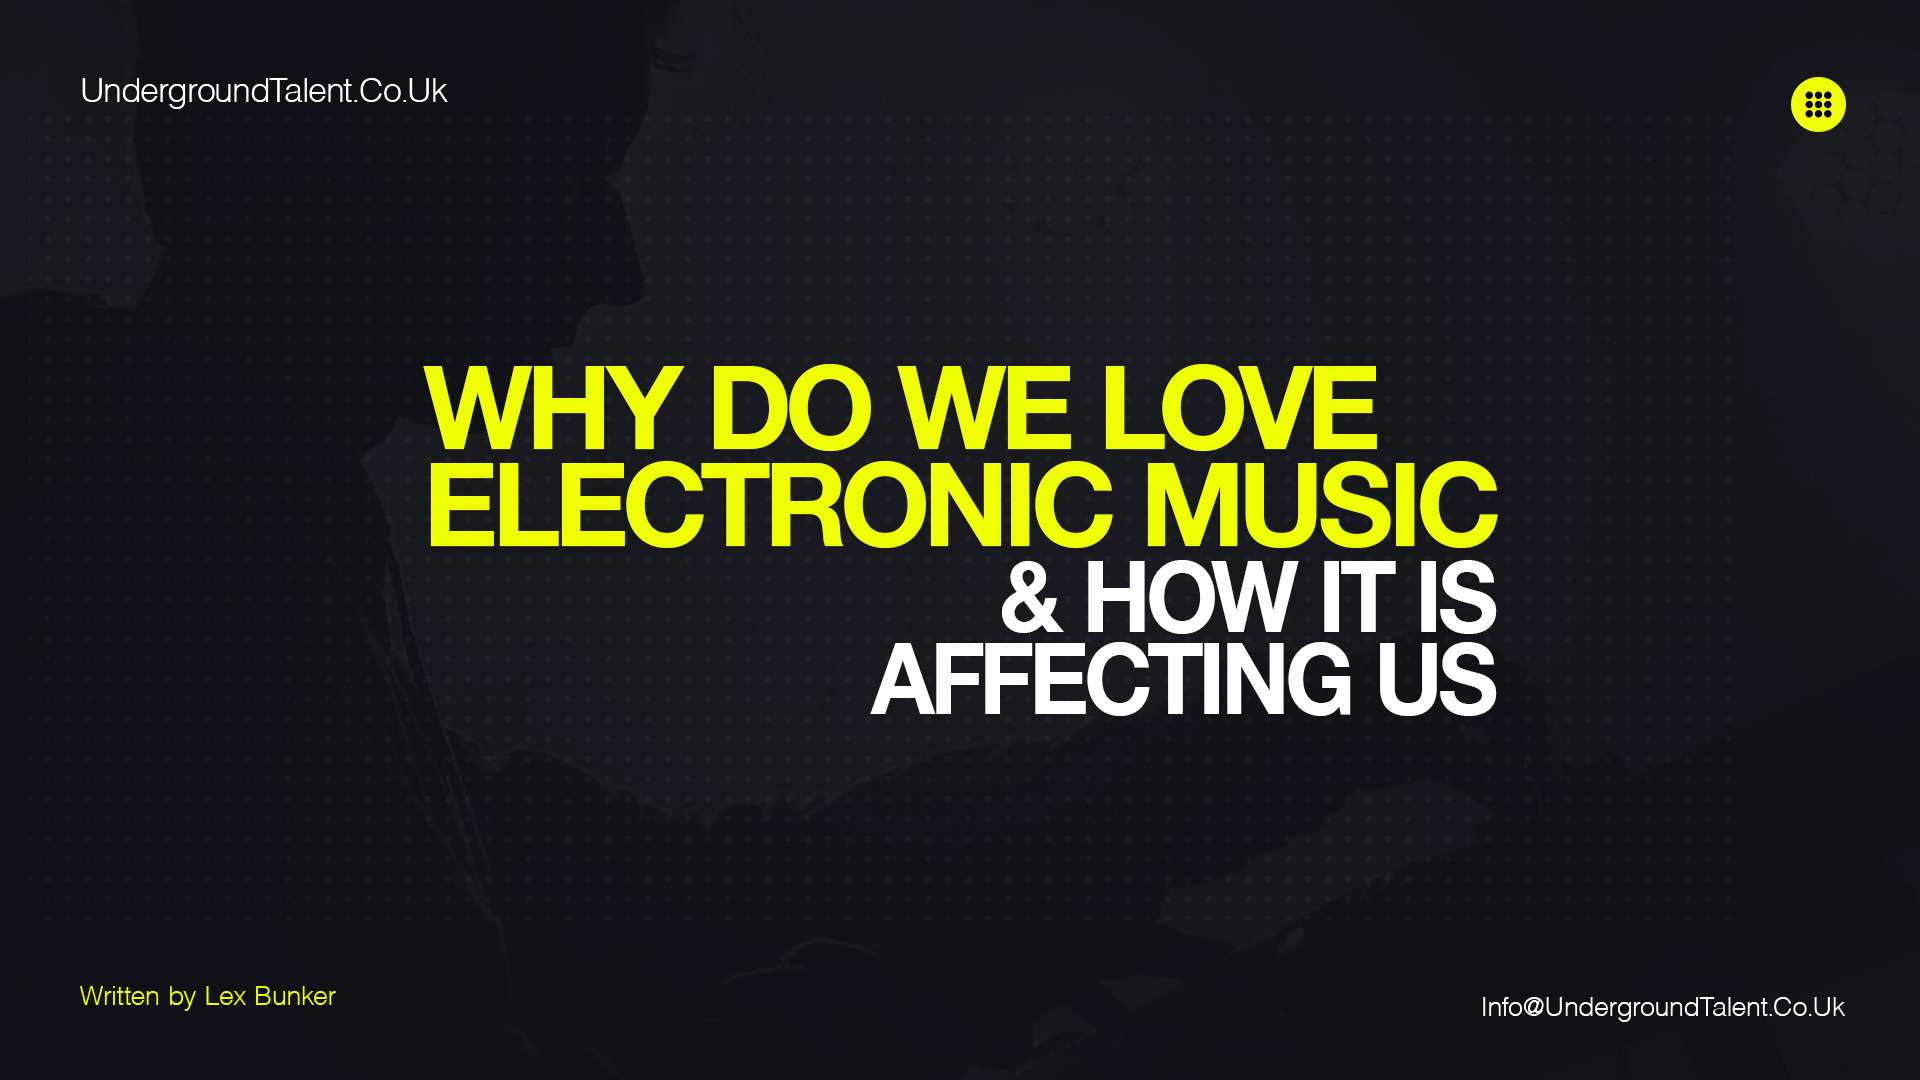 Why Do We Love Electronic Music & How It is Affecting Us?